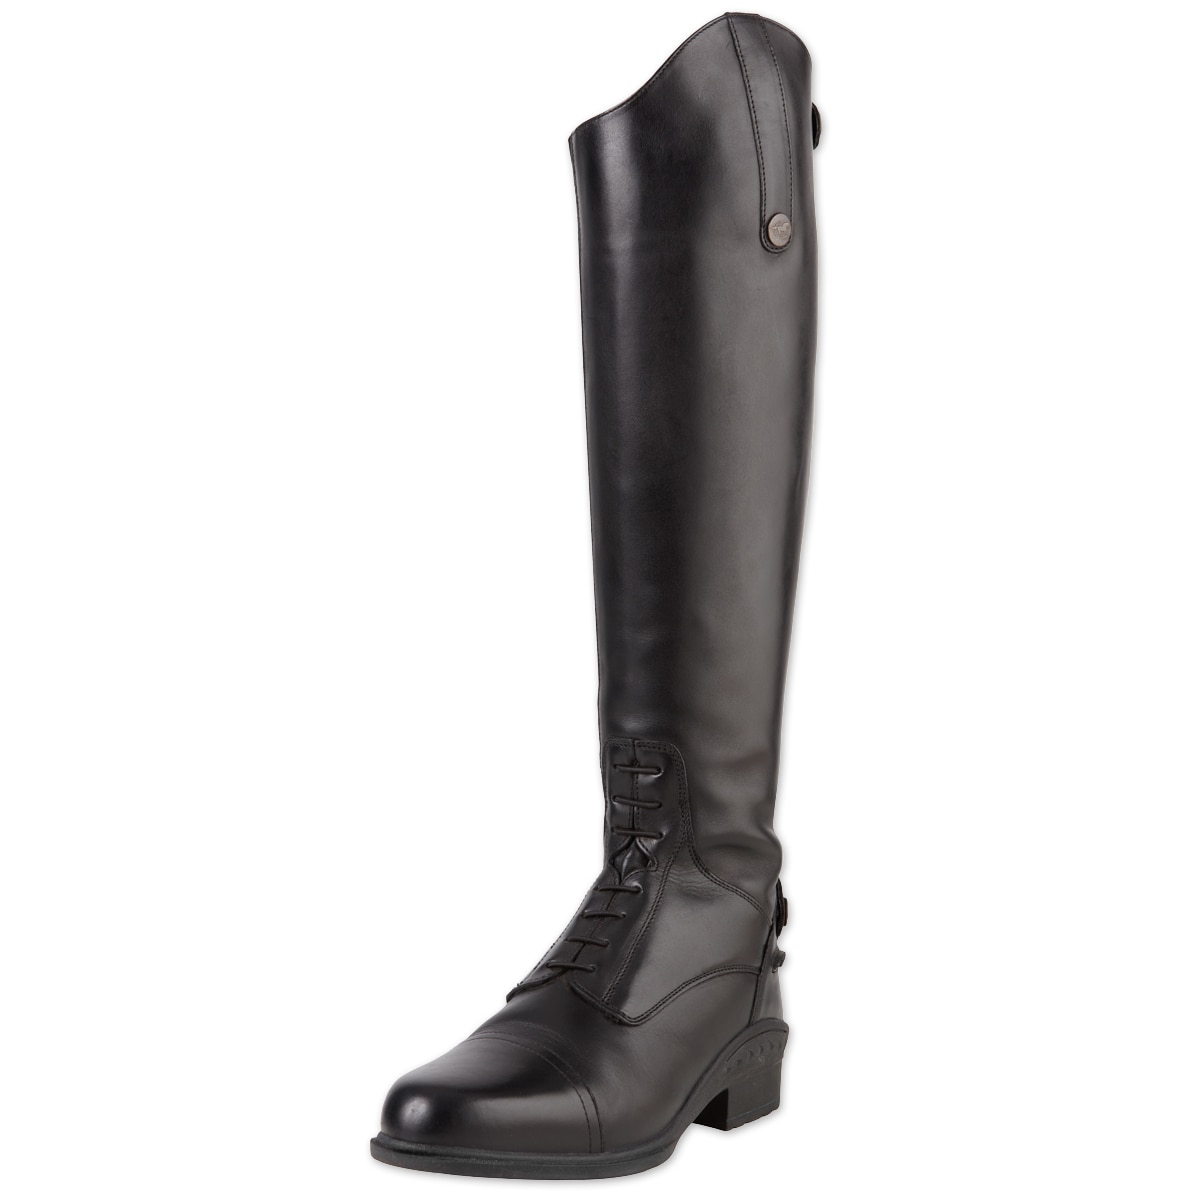 HKM Heel Risers for Riding Boots 